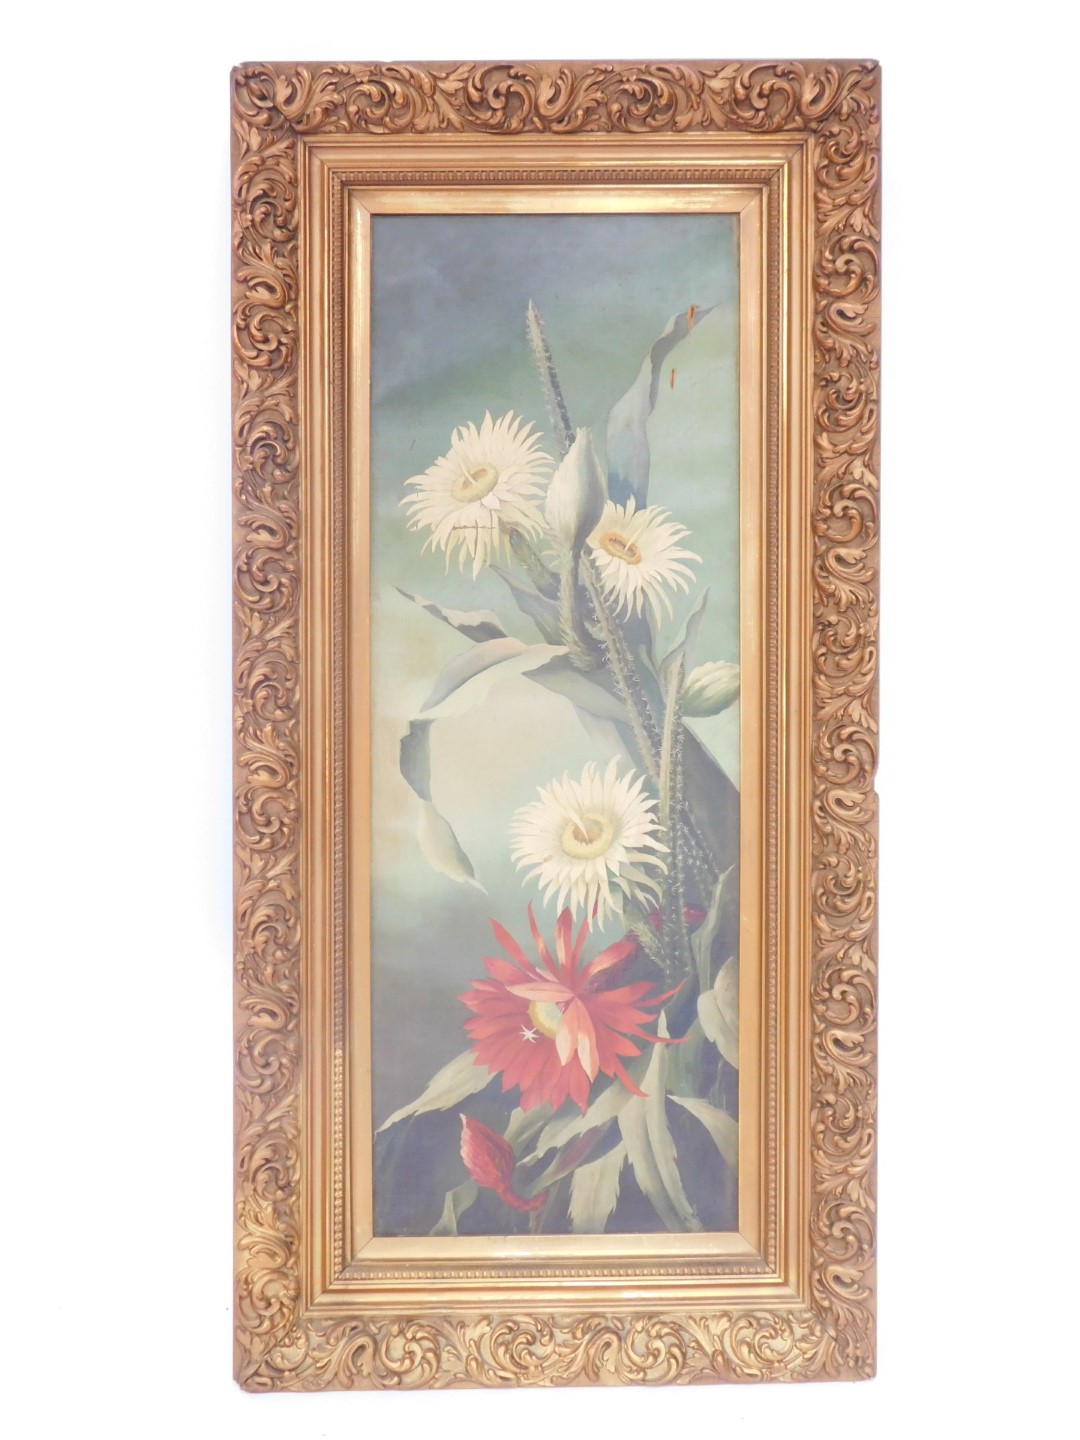 A Wardale (19thC School). Floral still life, with lilies and vines, oil on canvas, signed and